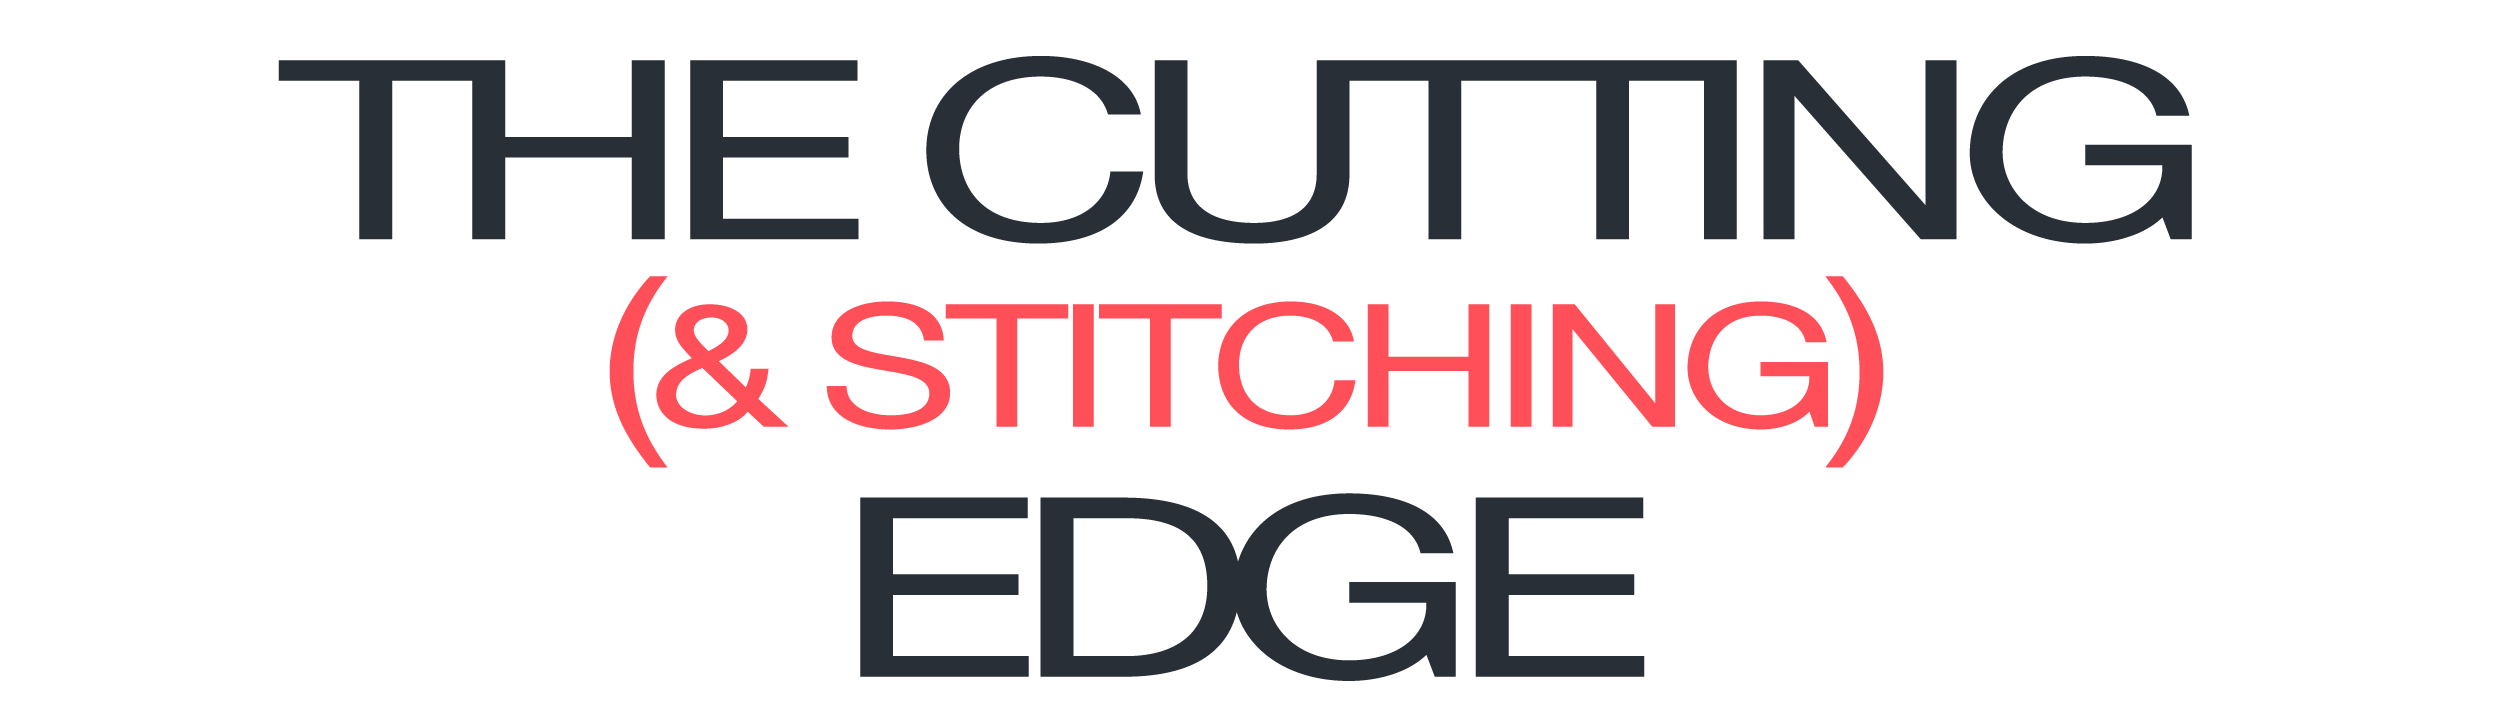 The Cutting & Stitching Edge | Contemporary Embroidered Art from Mr X Stitch